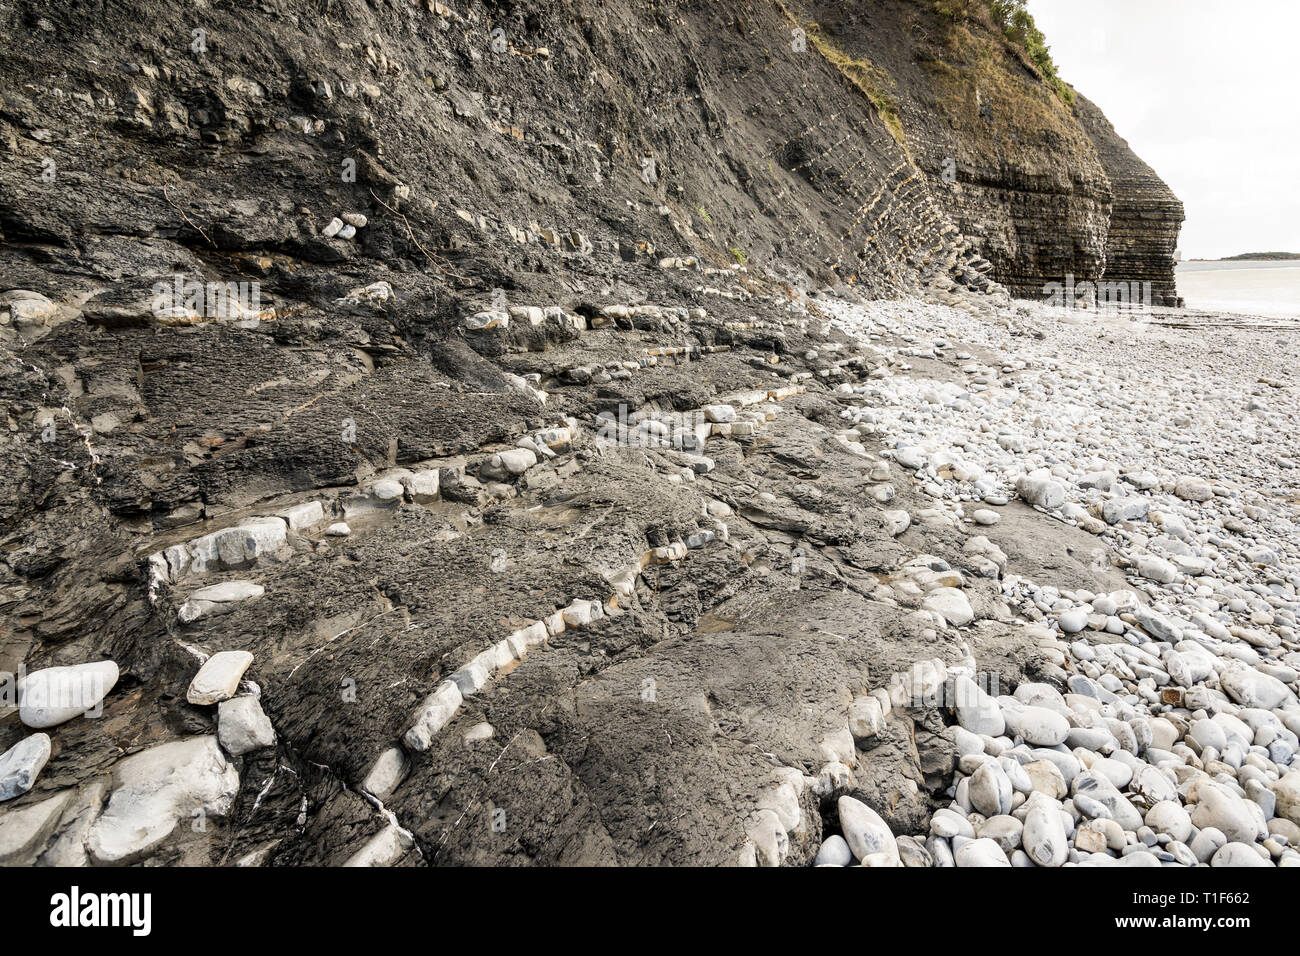 Rock strata revealed by erosion at the base of cliffs by Bull's Nose, The Knap, Barry, South Wales. Stock Photo